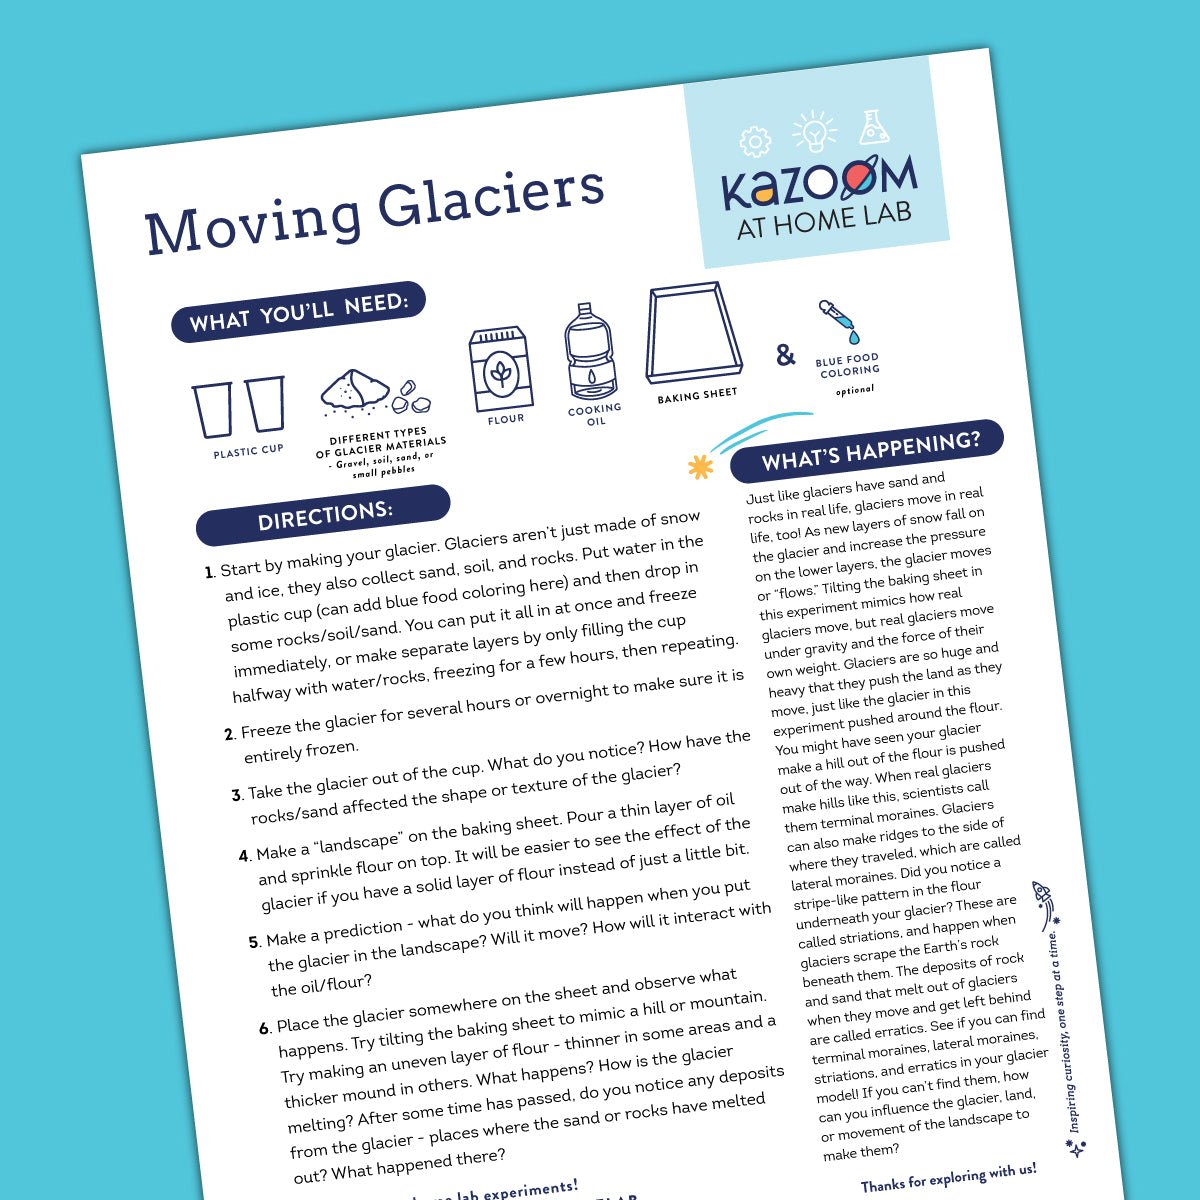 At Home Lab: Moving Glaciers